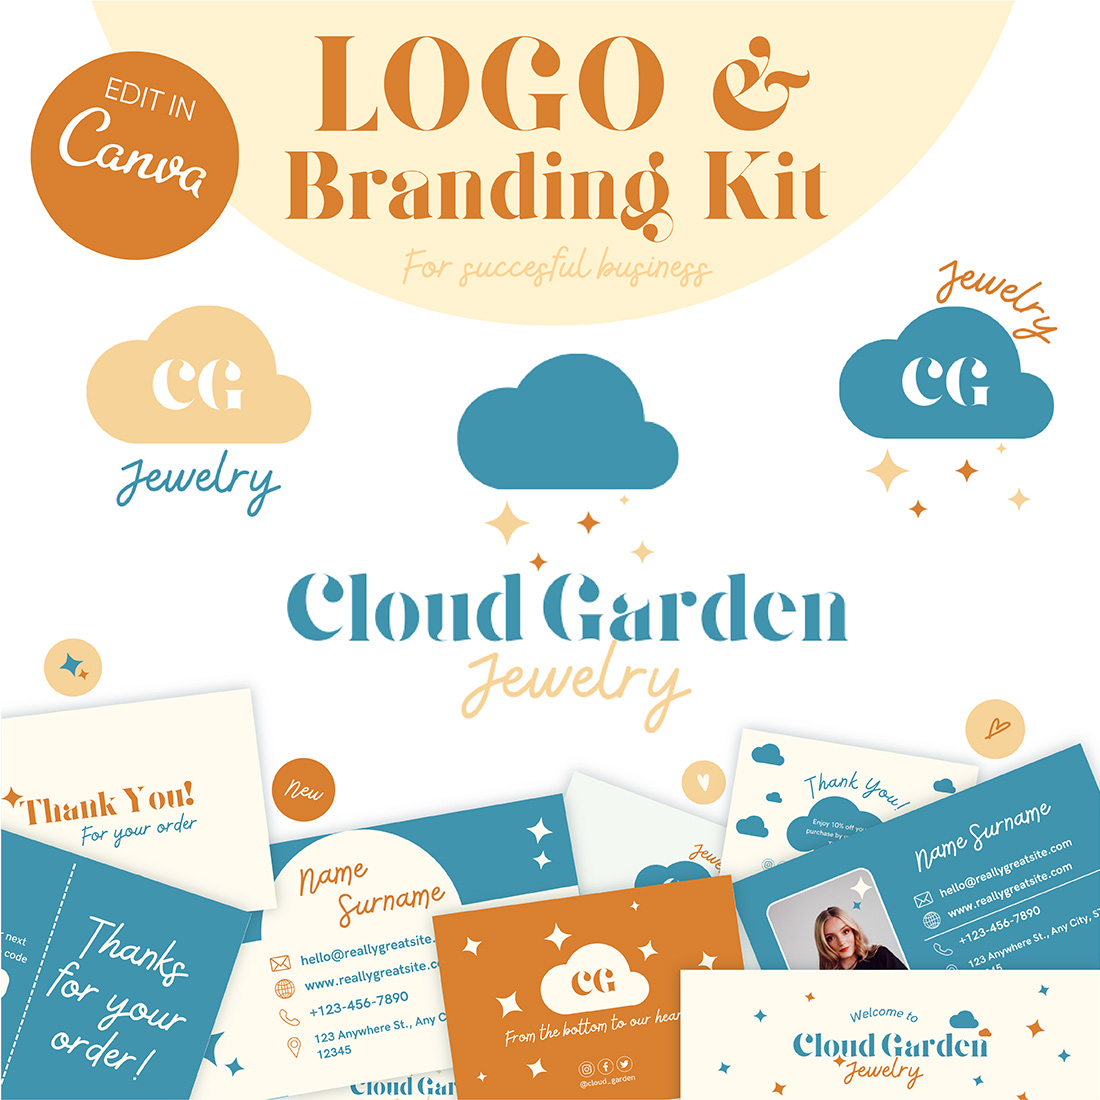 Branding Kit Canva Templates Editable Logo, Business Cards, Thank You Cards, Facebook & Twitter header Instagram Highlights cover image.